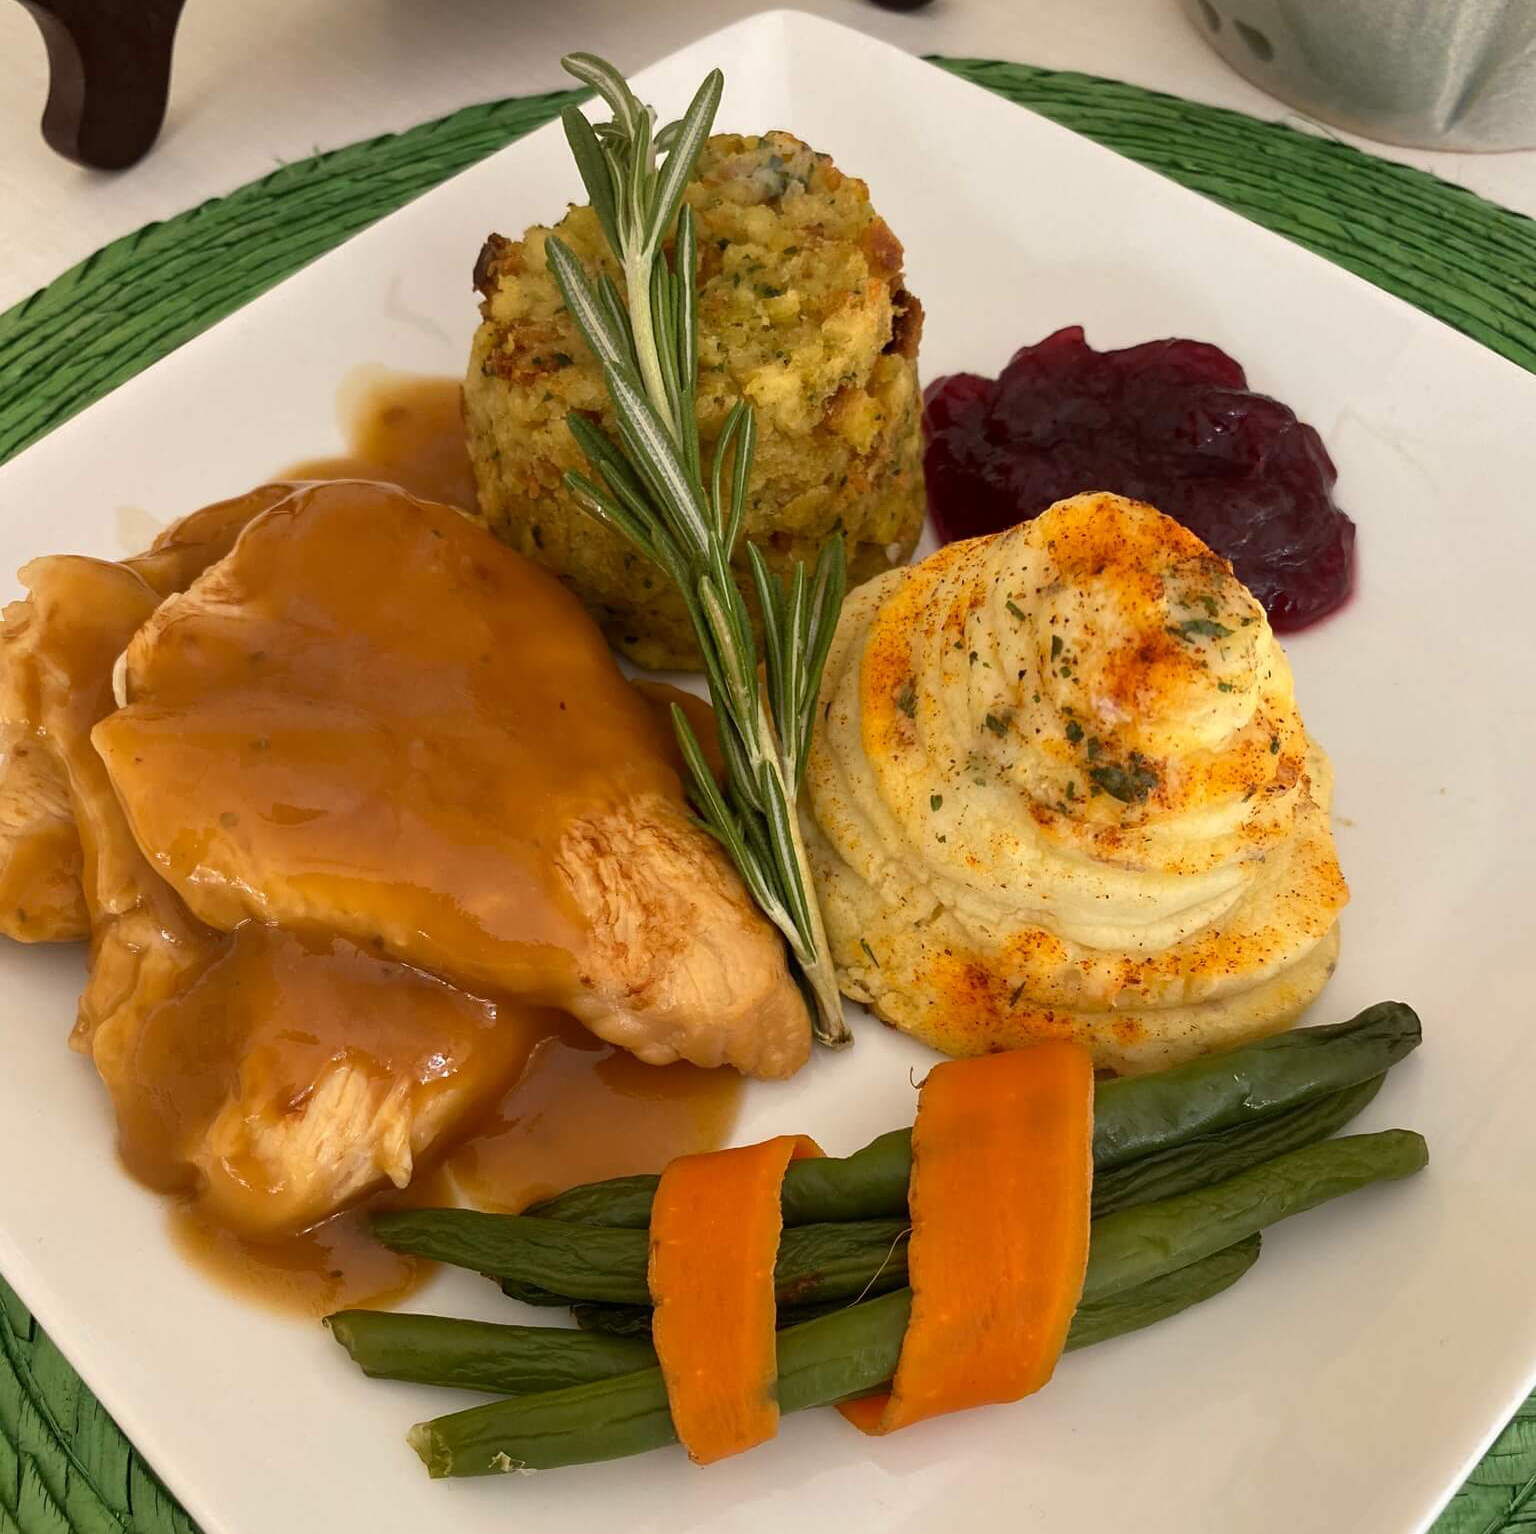 chicken, potato's, green beans plate of food made by retirement community chef